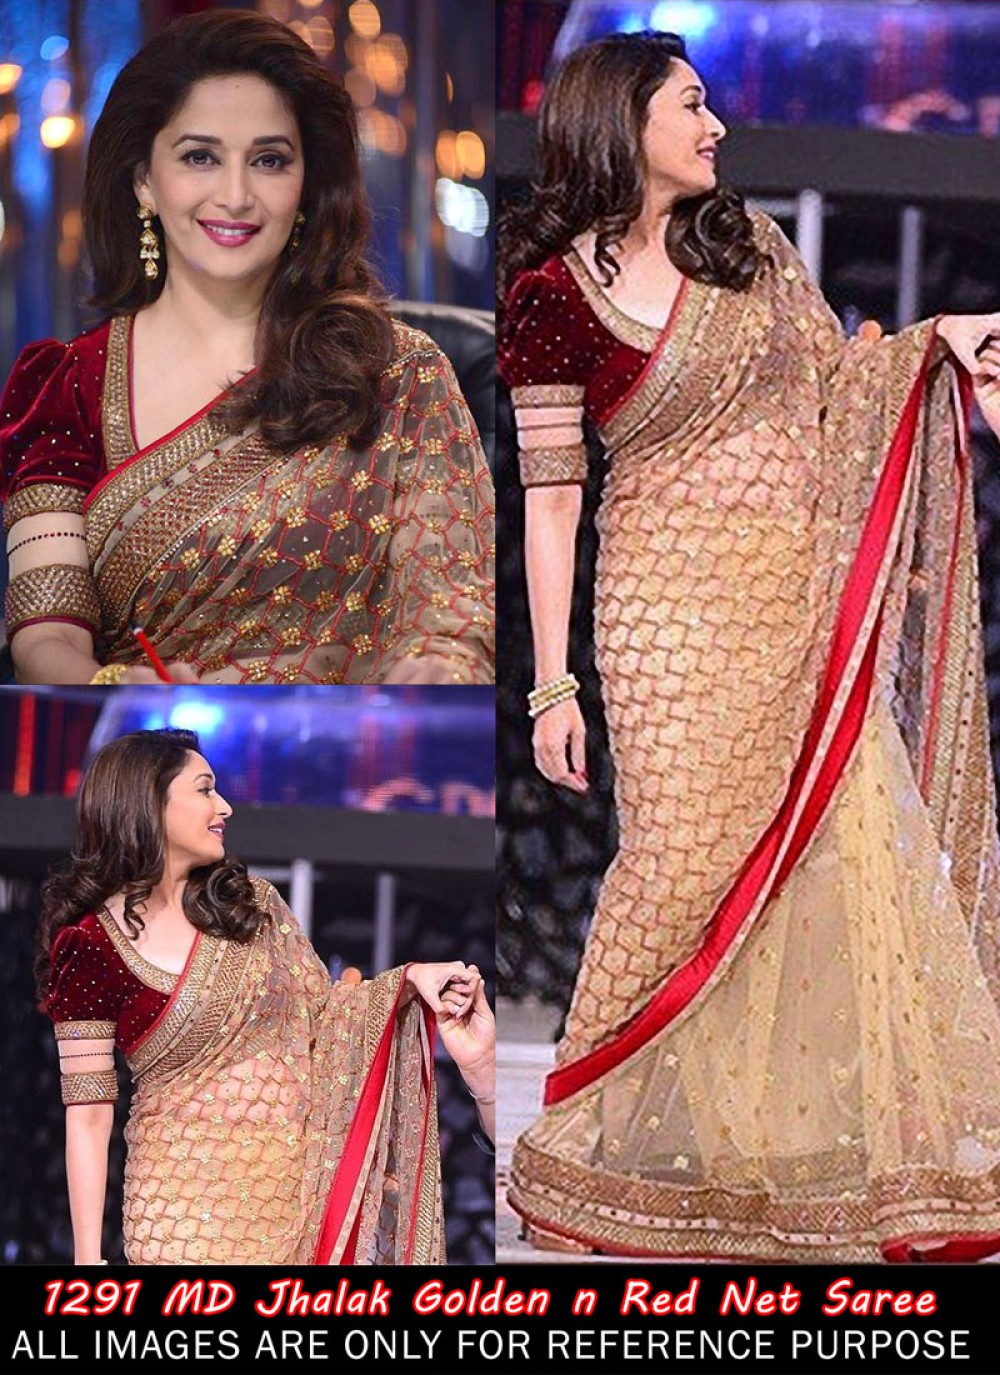 madhuri dixit style beige and red net saree